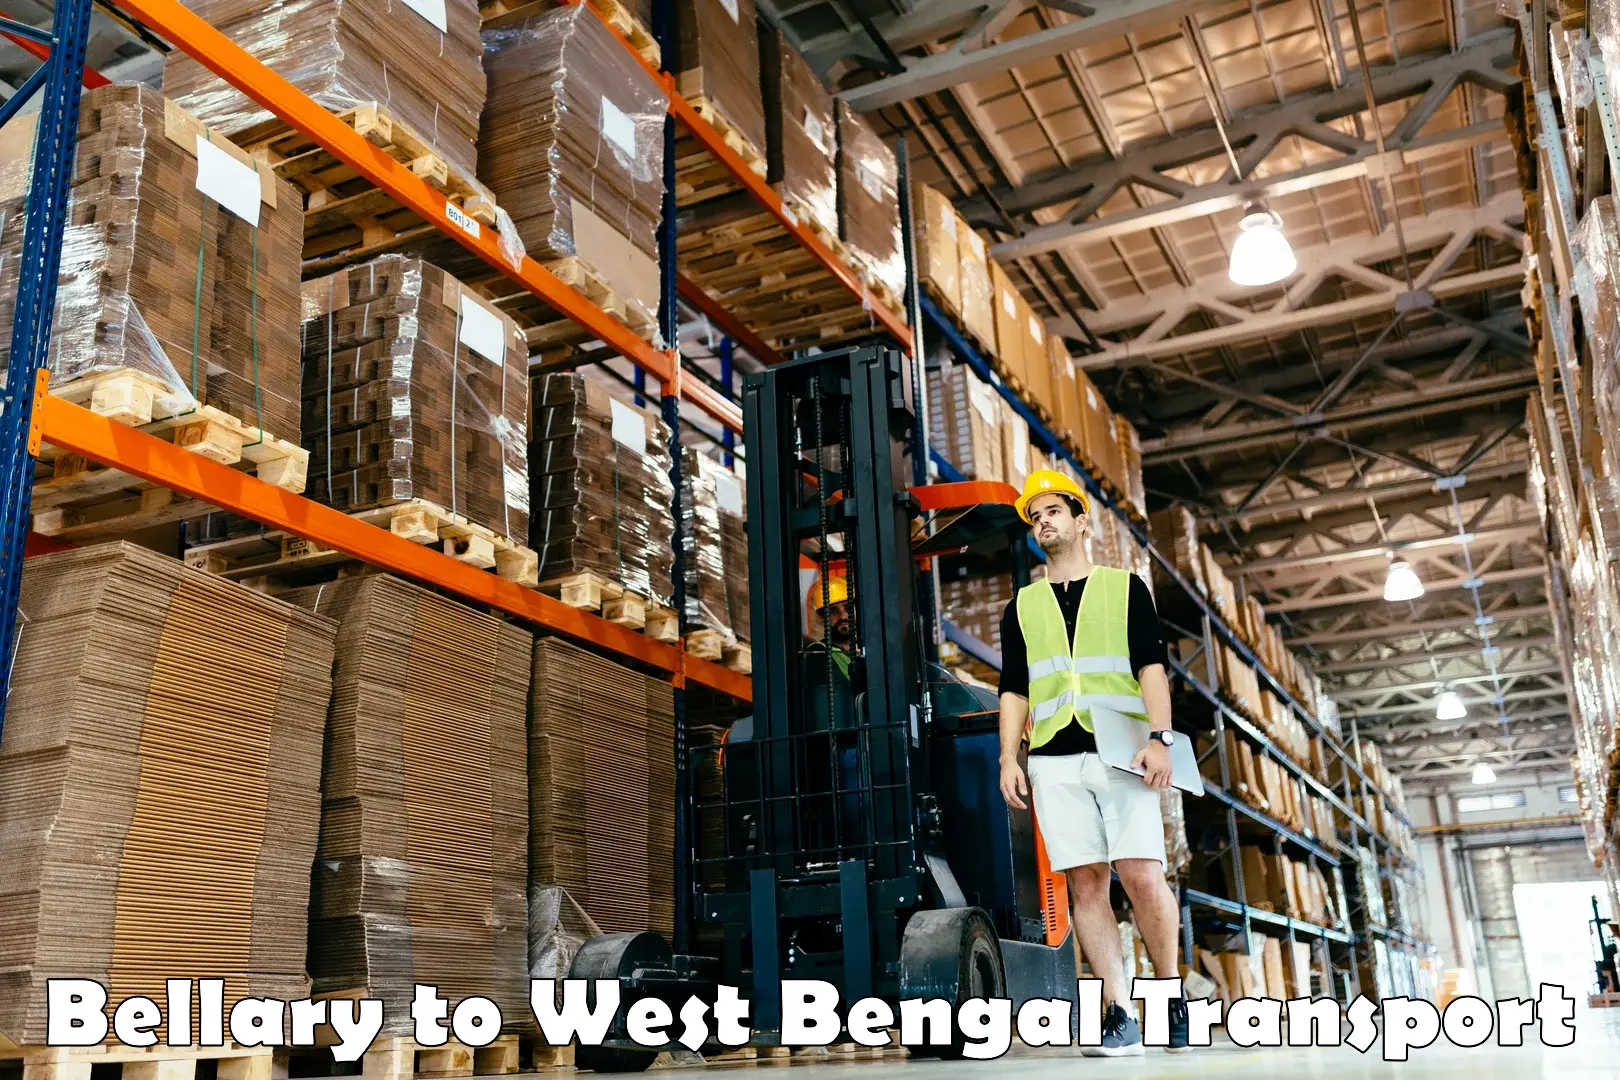 Truck transport companies in India Bellary to Bally